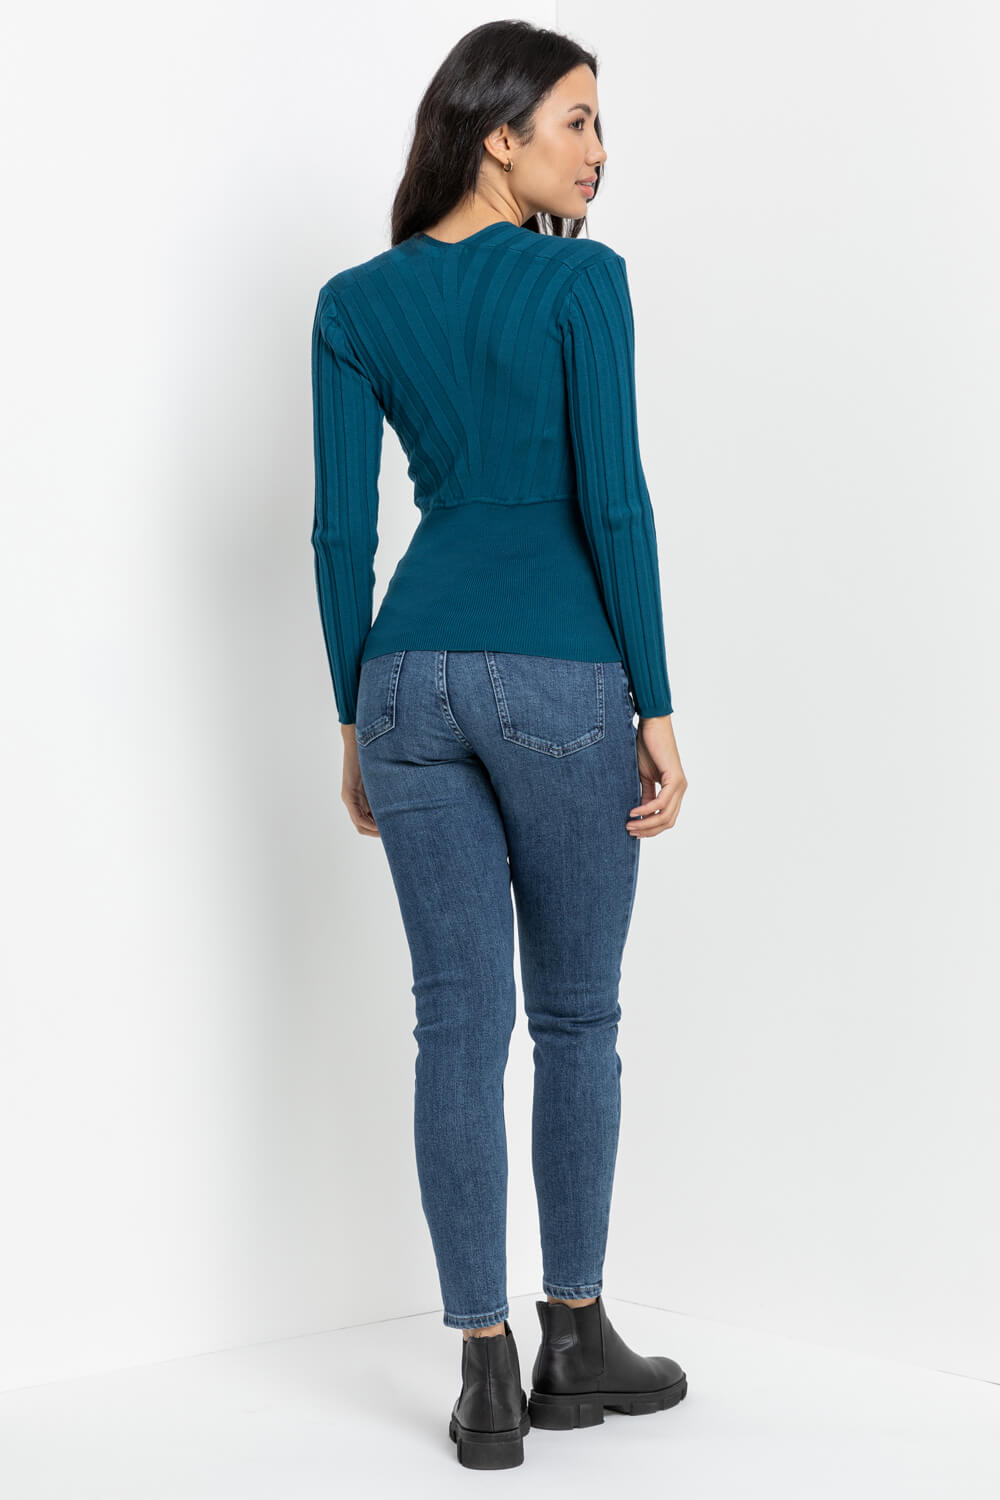 Teal Rib Front Wrap Jumper, Image 2 of 5